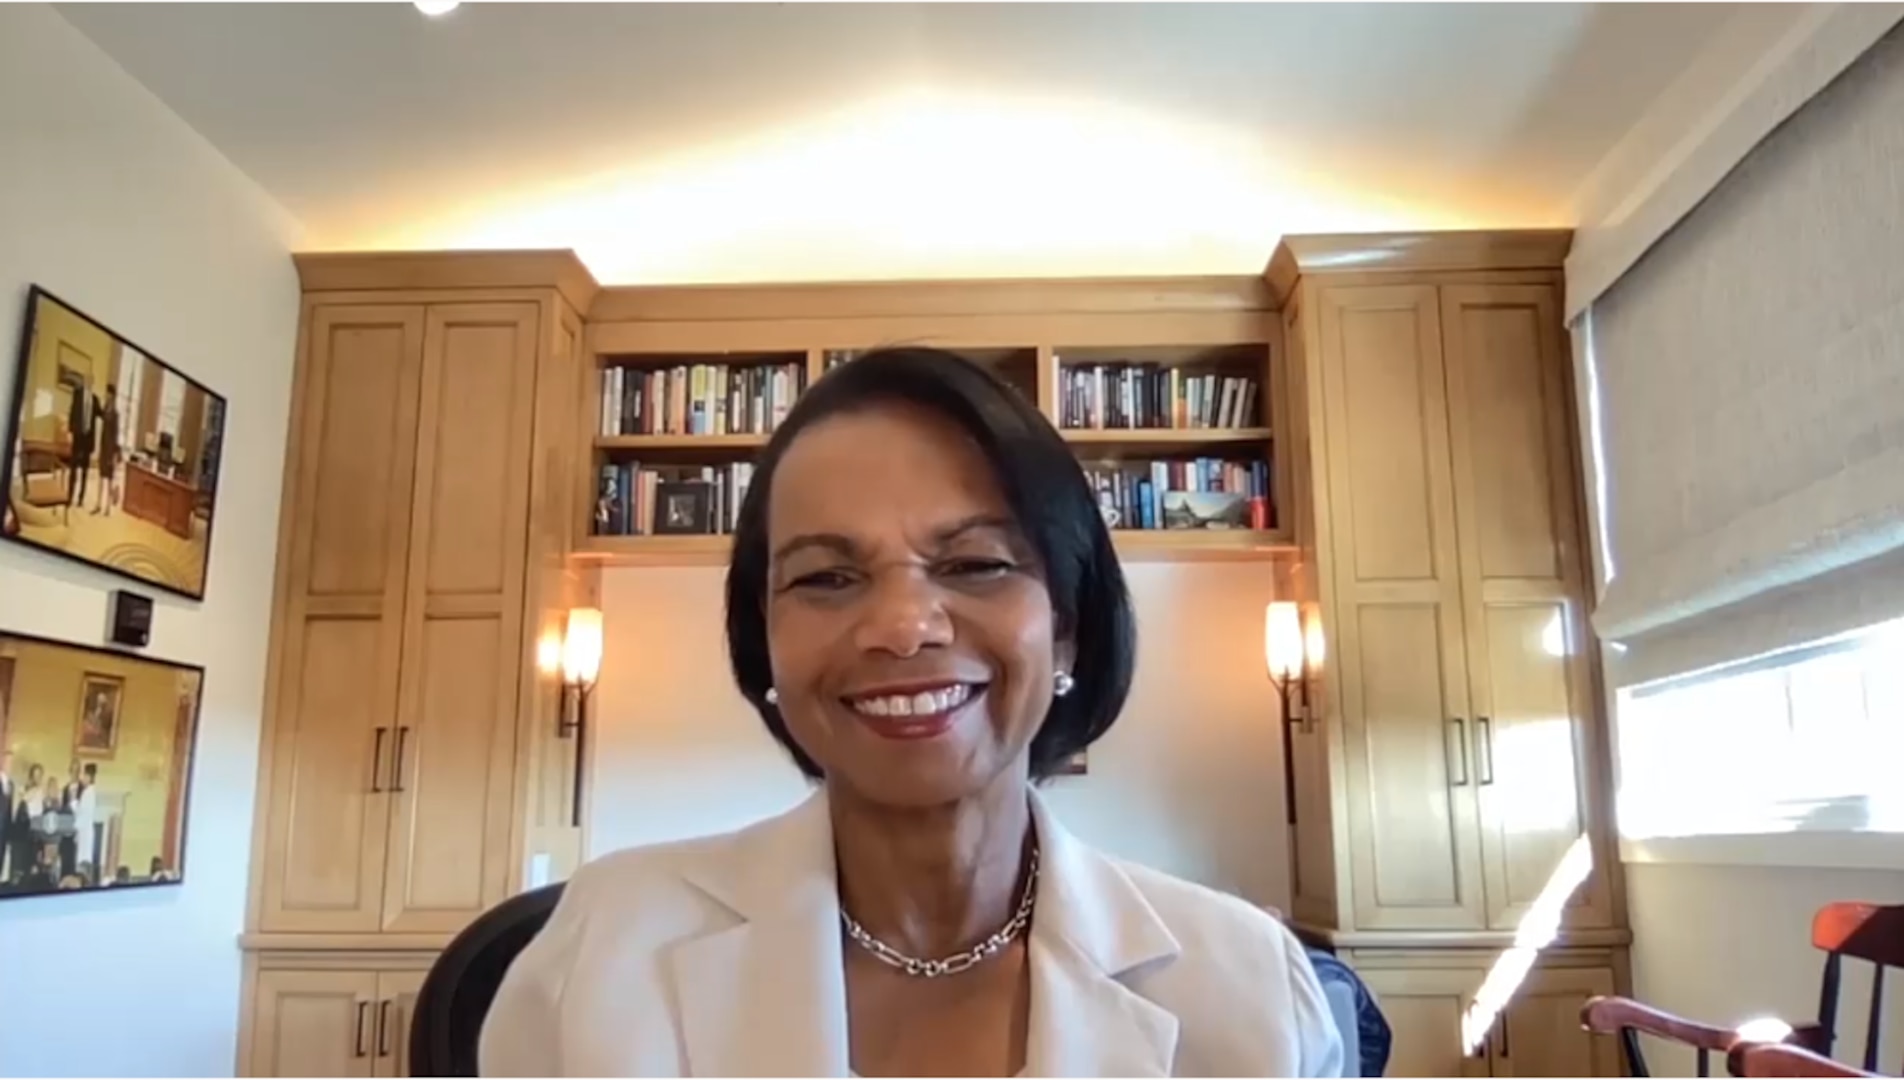 Condoleezza Rice speaks at a virtual MasterMinds guest speaker event hosted by the Defense Intelligence Agency.